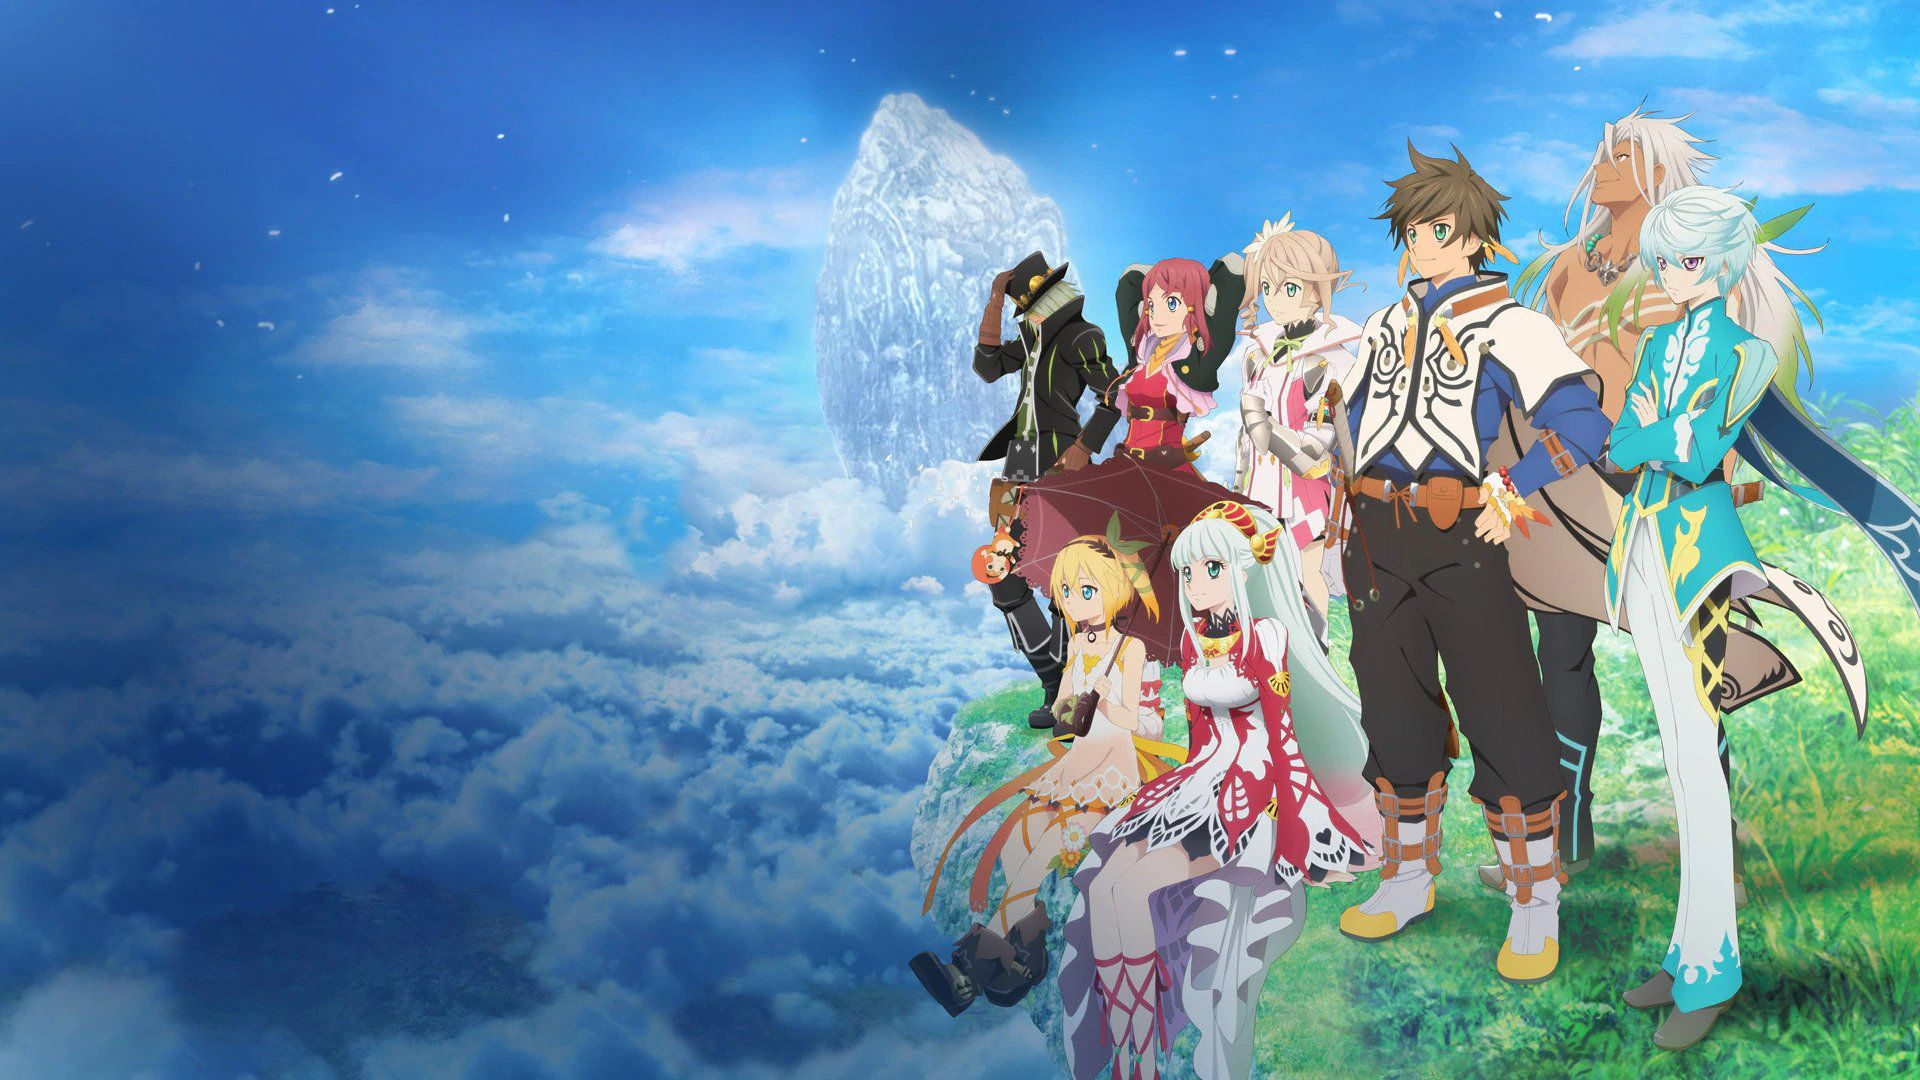 1920x1080 Tales of Zestiria (2015) | Altar of Gaming